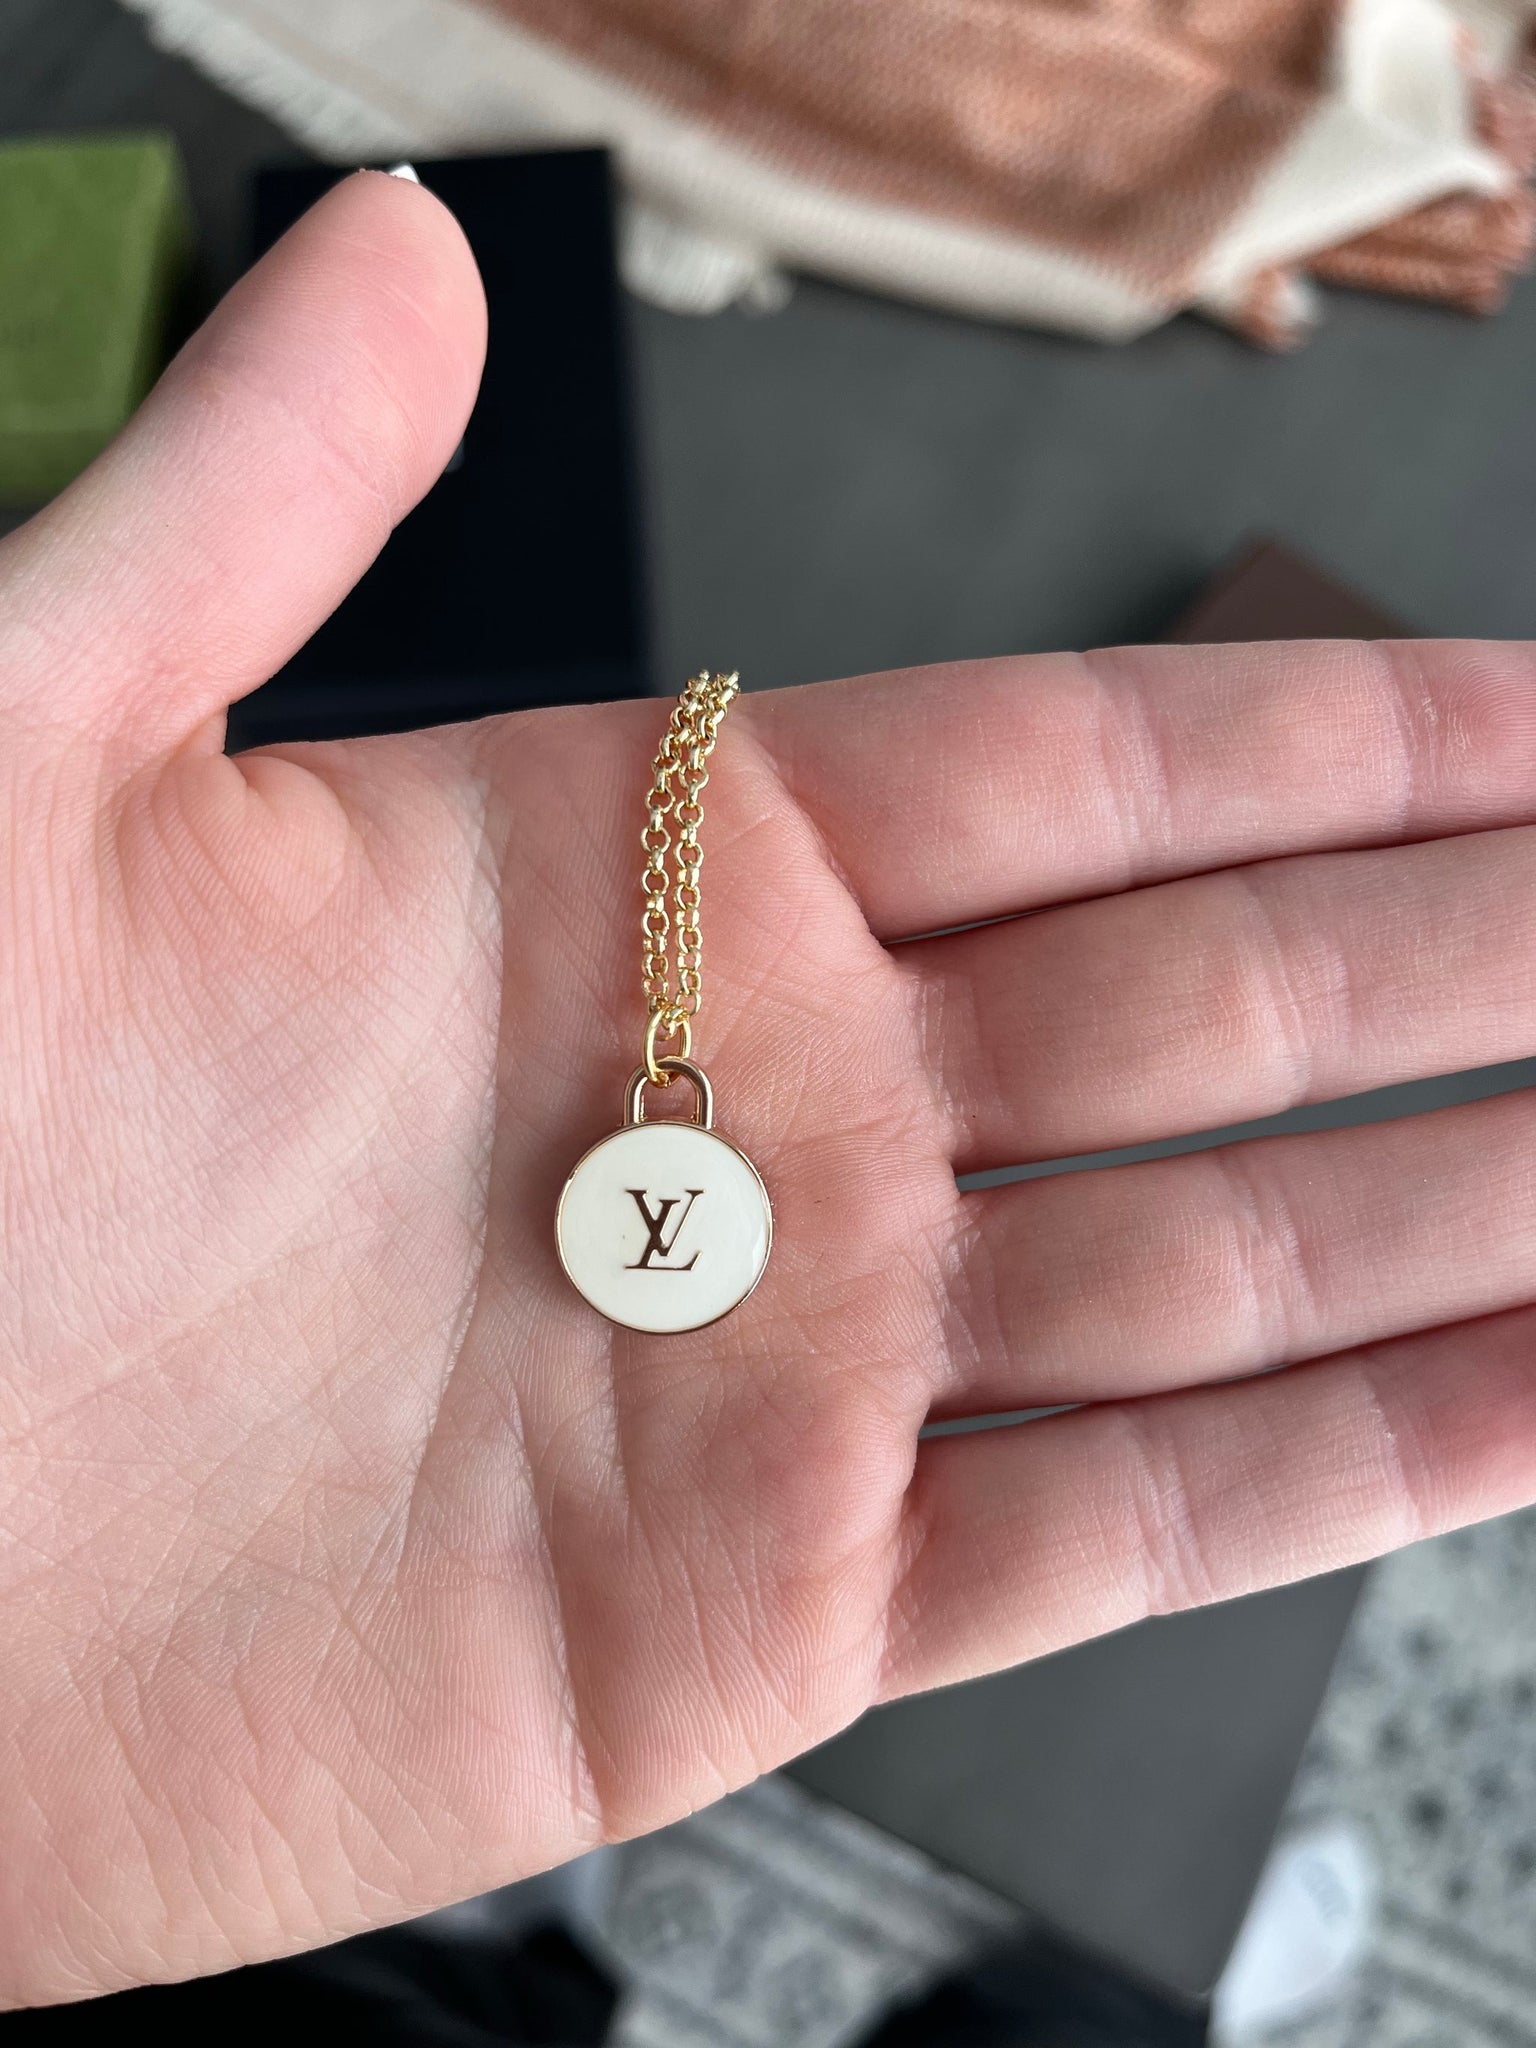 Louis Vuitton Charm Necklace Repurposed Pink Charm